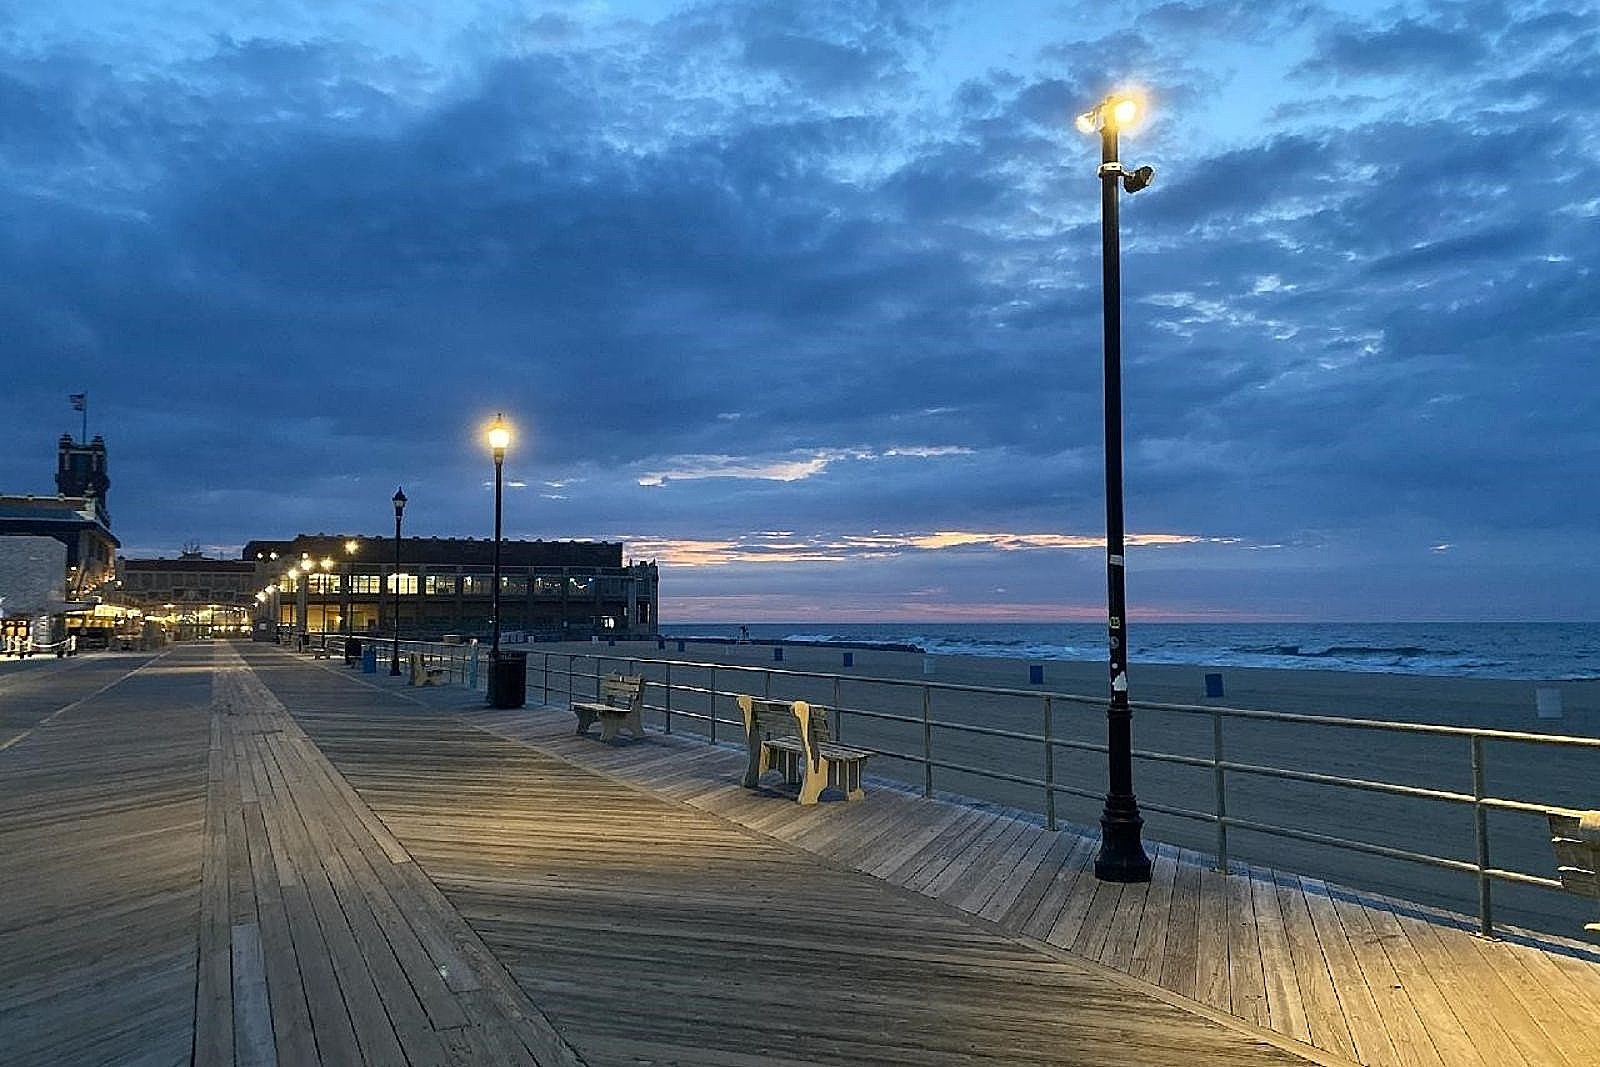 A look at a peaceful Asbury Park boardwalk during NJ's off-season